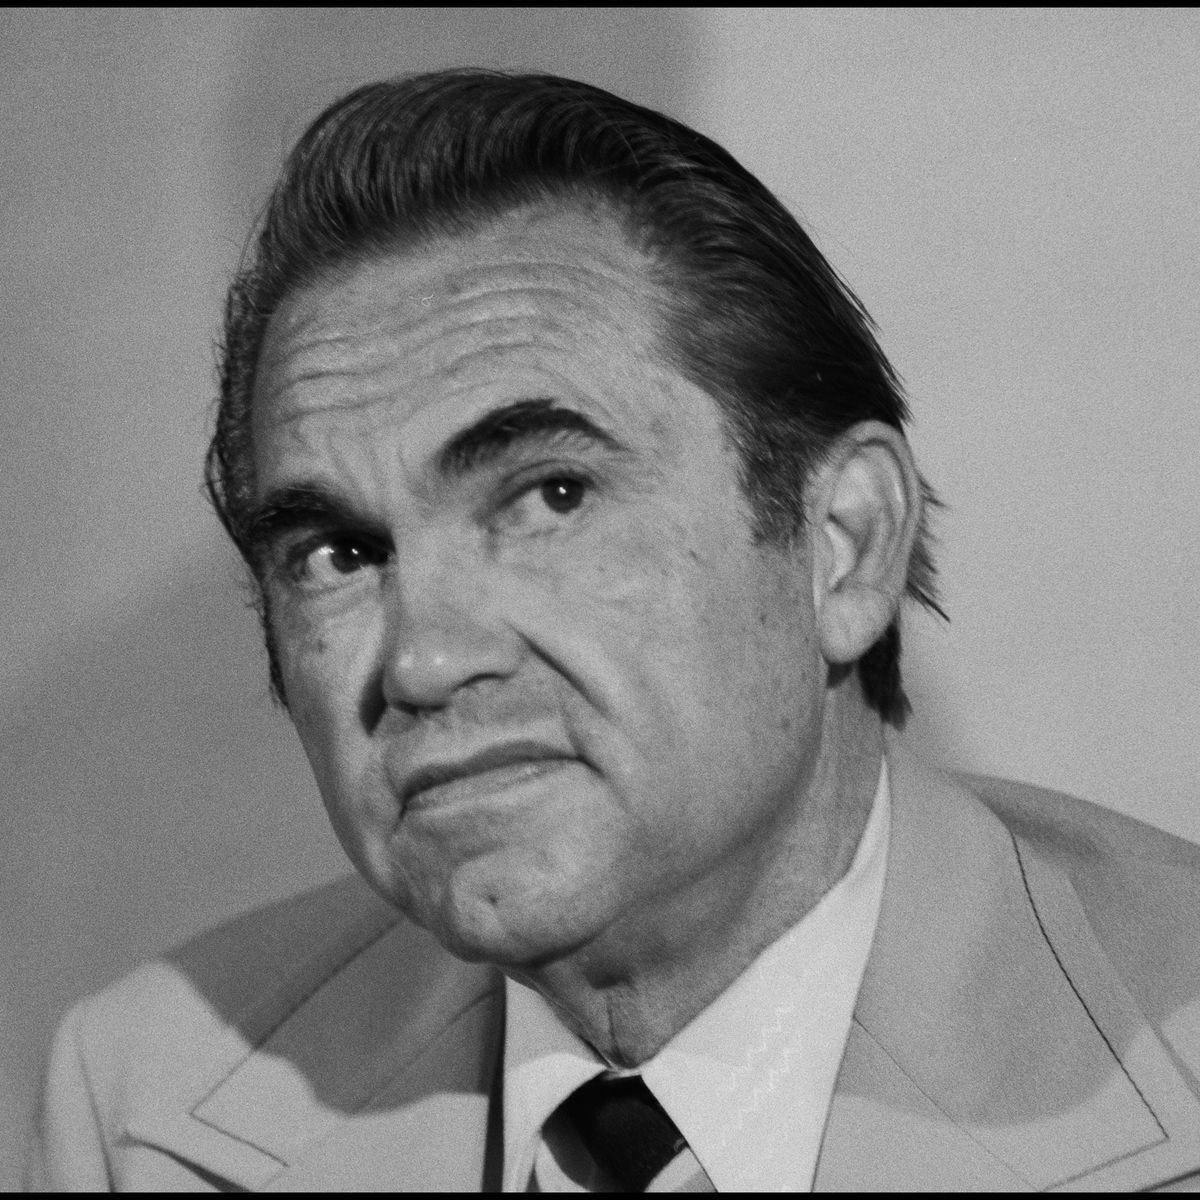 George Wallace Campaigns In San FranciscoClose-up of American politician Alabama Governor George Wallace (1919 - 1998) during a campaign press conference at the San Francisco Airport Hilton hotel, San Francisco, California, June 4, 1976. He was there during his (ultimately unsuccessful) campaign for the Democratic Party's Presidential nomination. (Photo by Janet Fries/Getty Images)